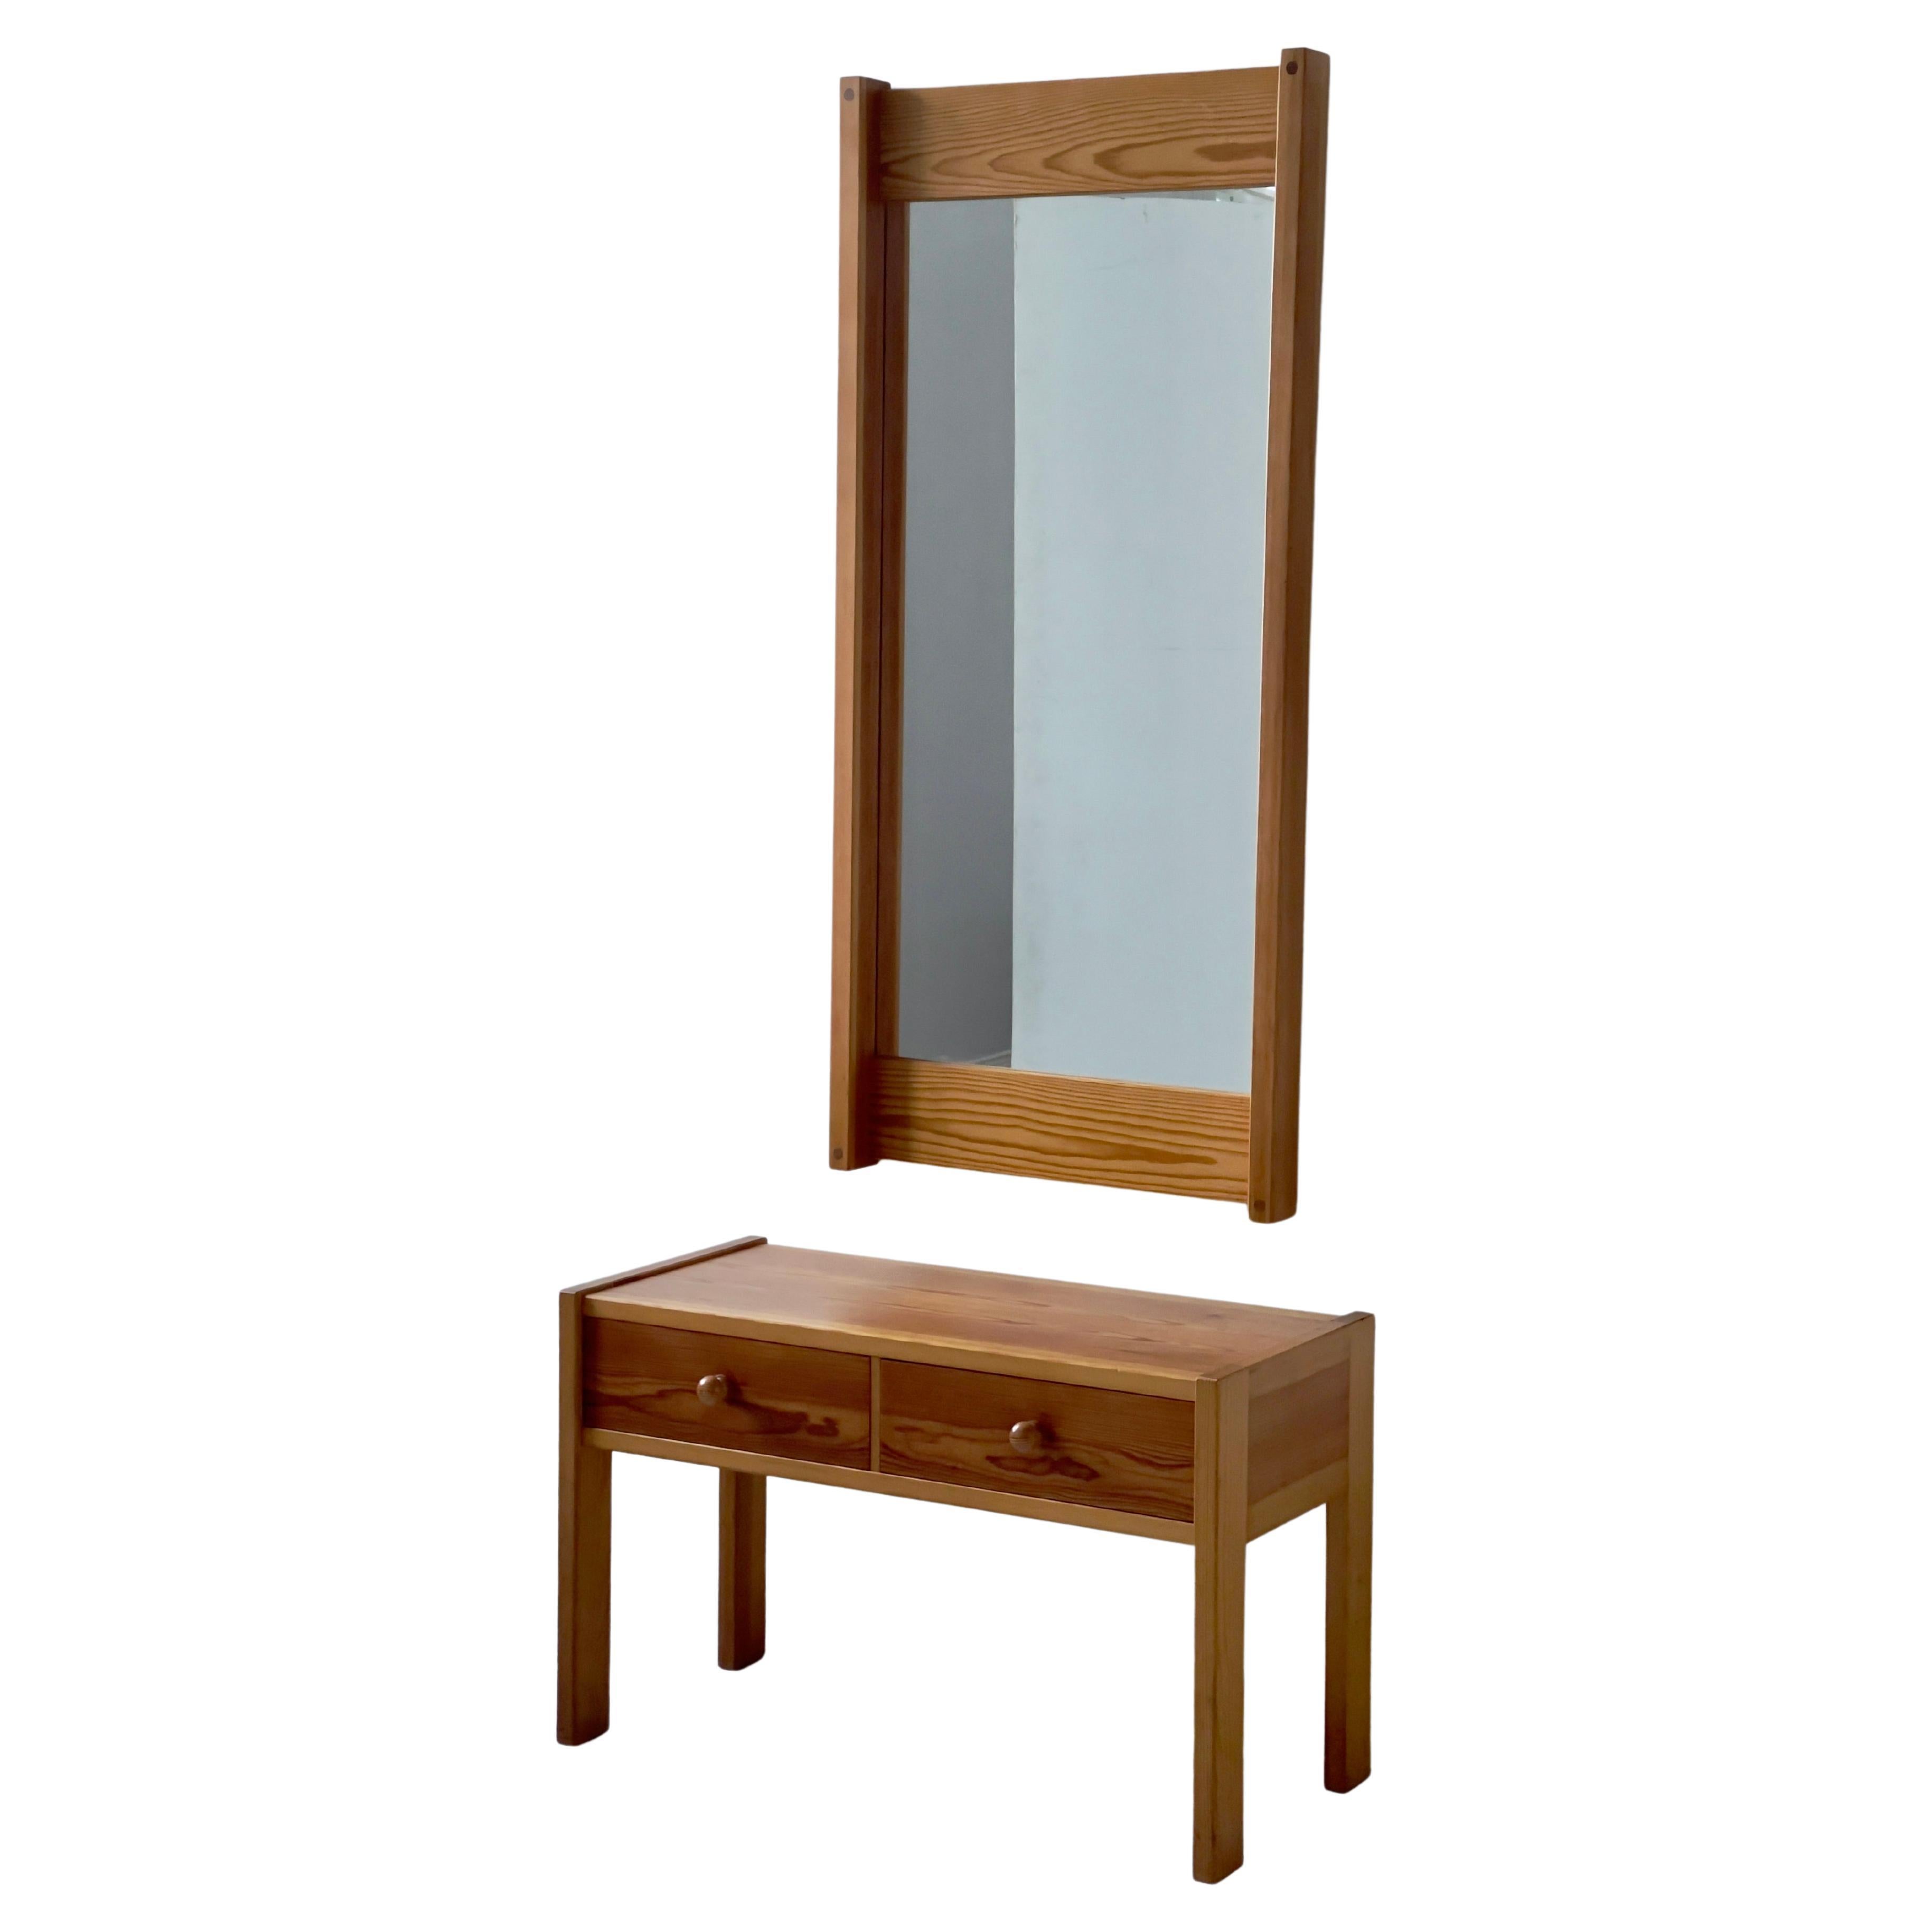 Danish 1970s mirror and console table in solid pine design by Aksel Kjersgaard For Sale